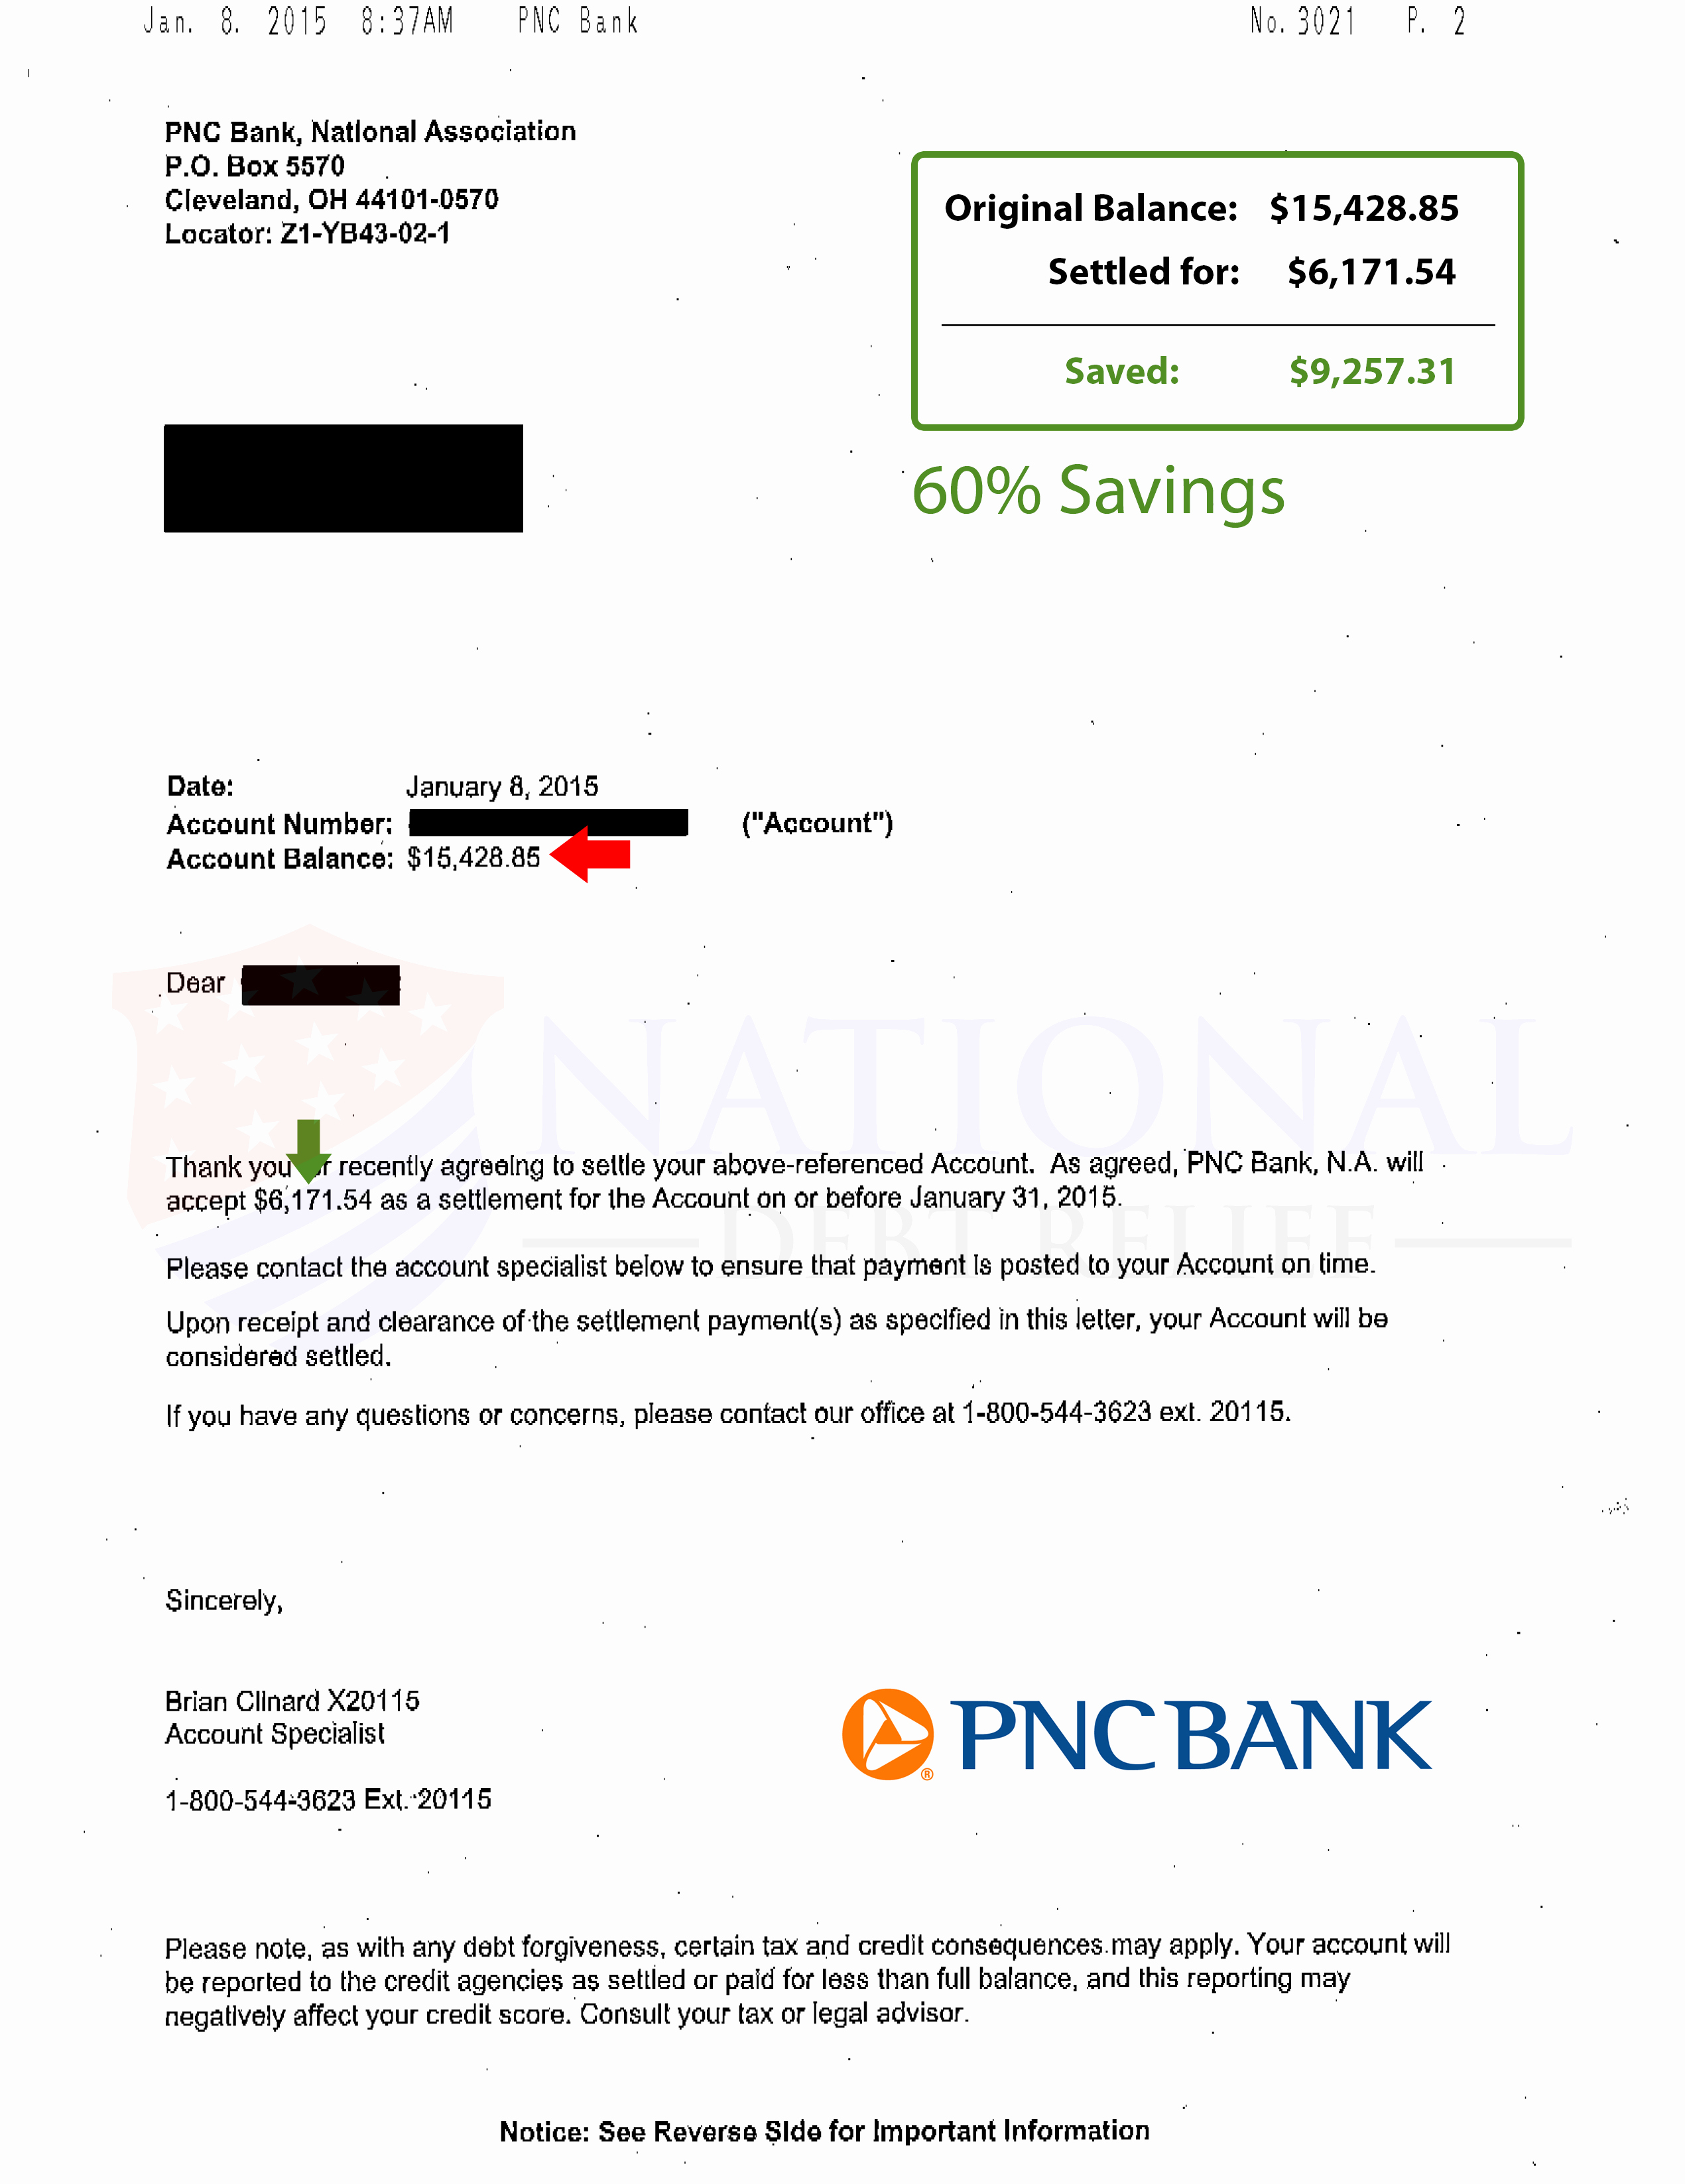 Chase Bank Proof Of Funds Letter Awesome Debt Settlement Letters